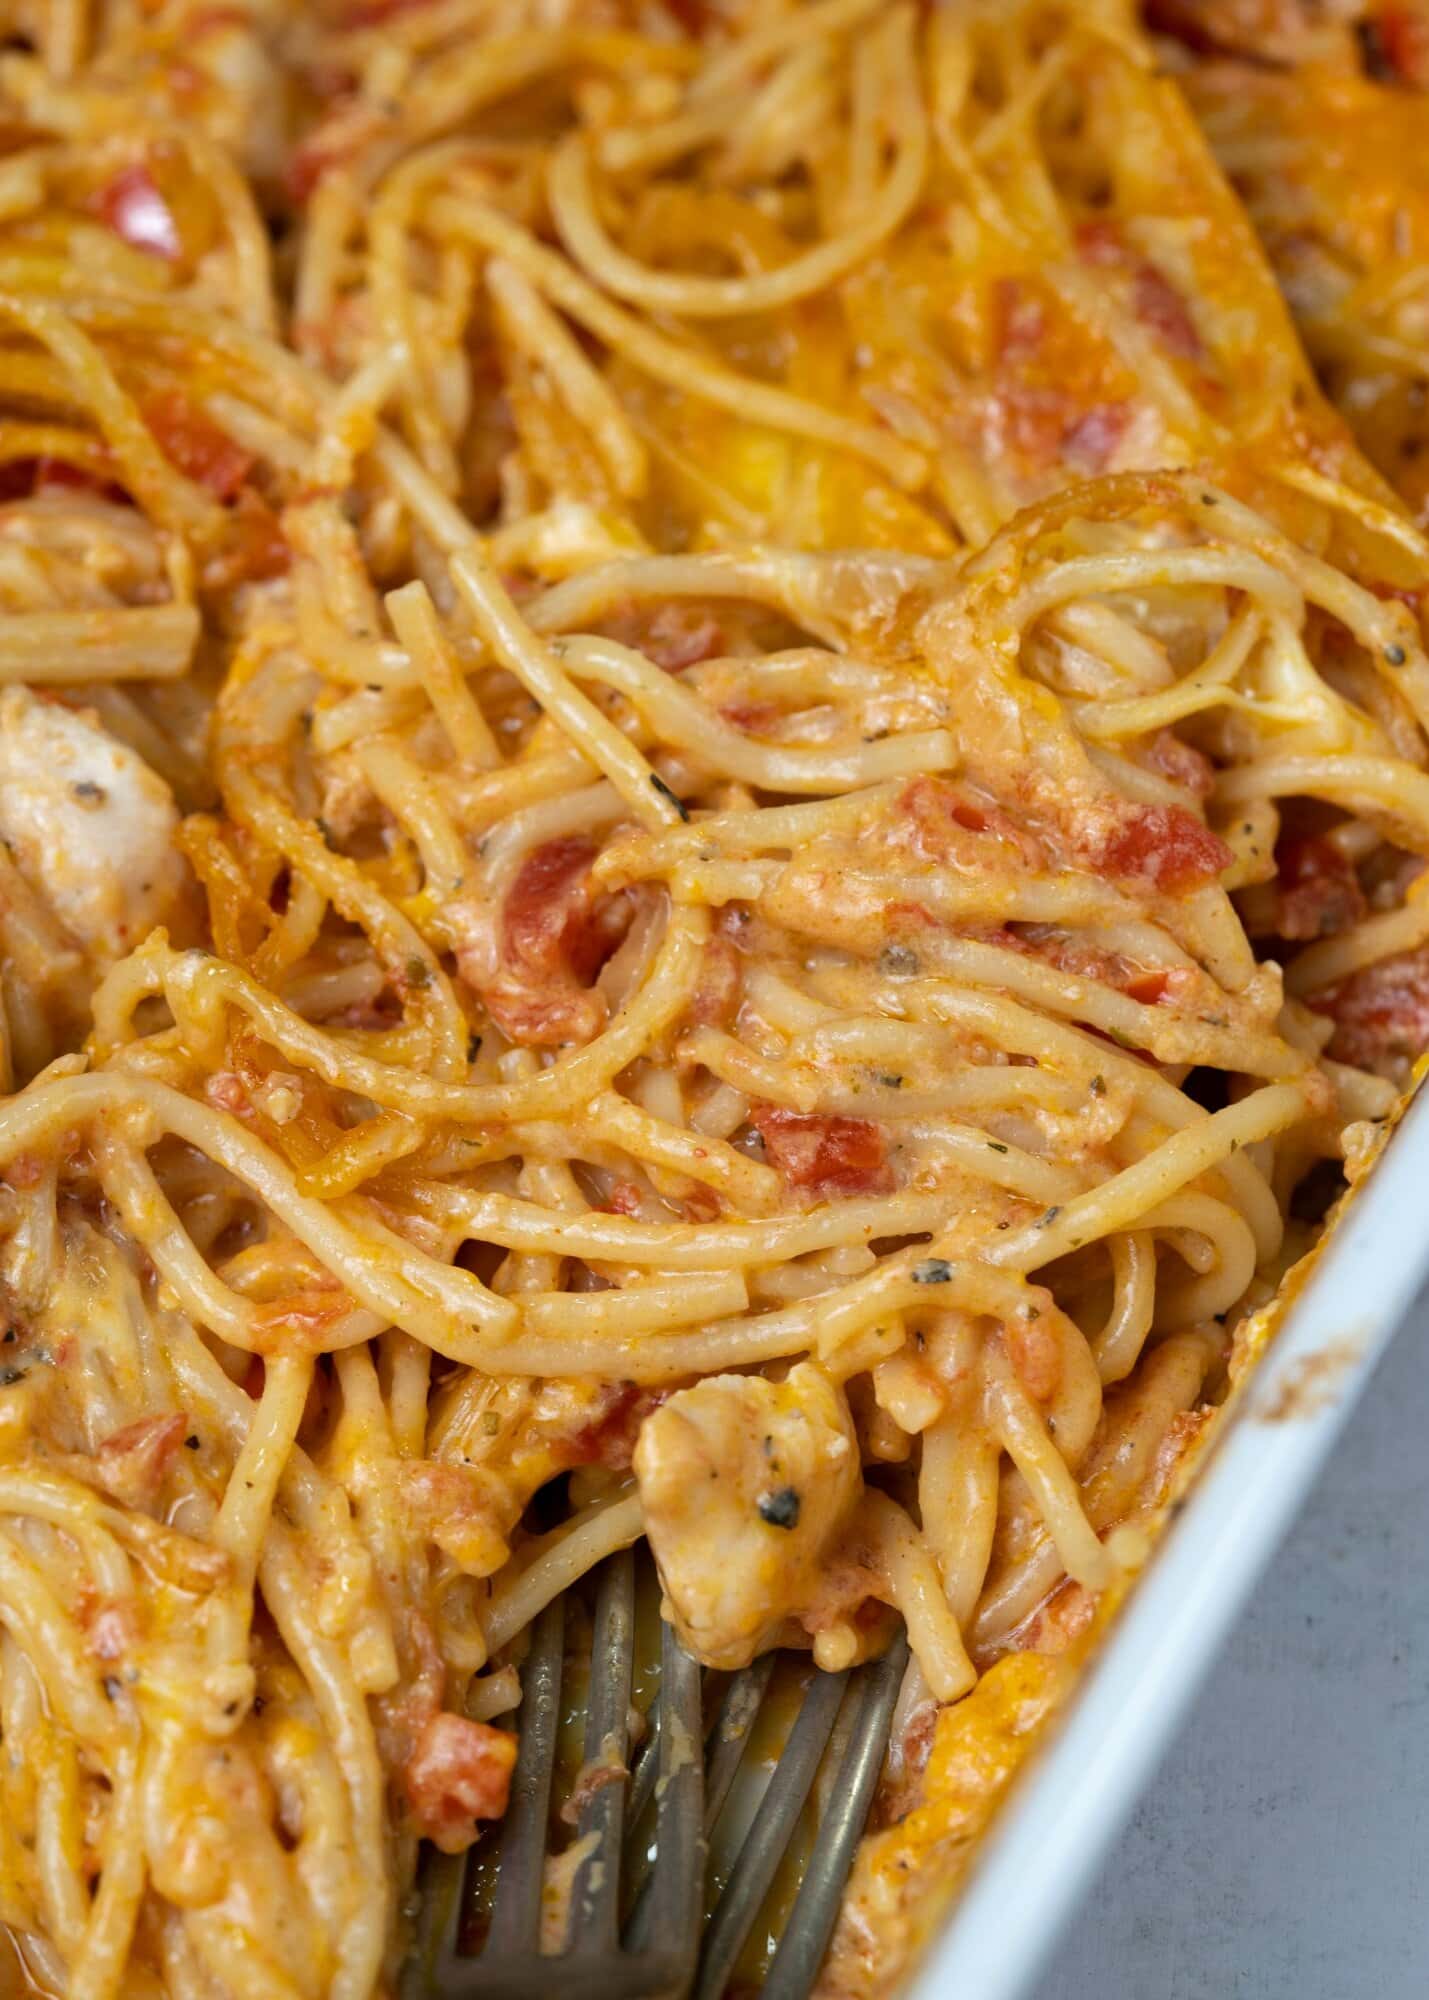 close up view of baked chicken spaghetti showing cheesy saucy spaghetti with chicken chunks 